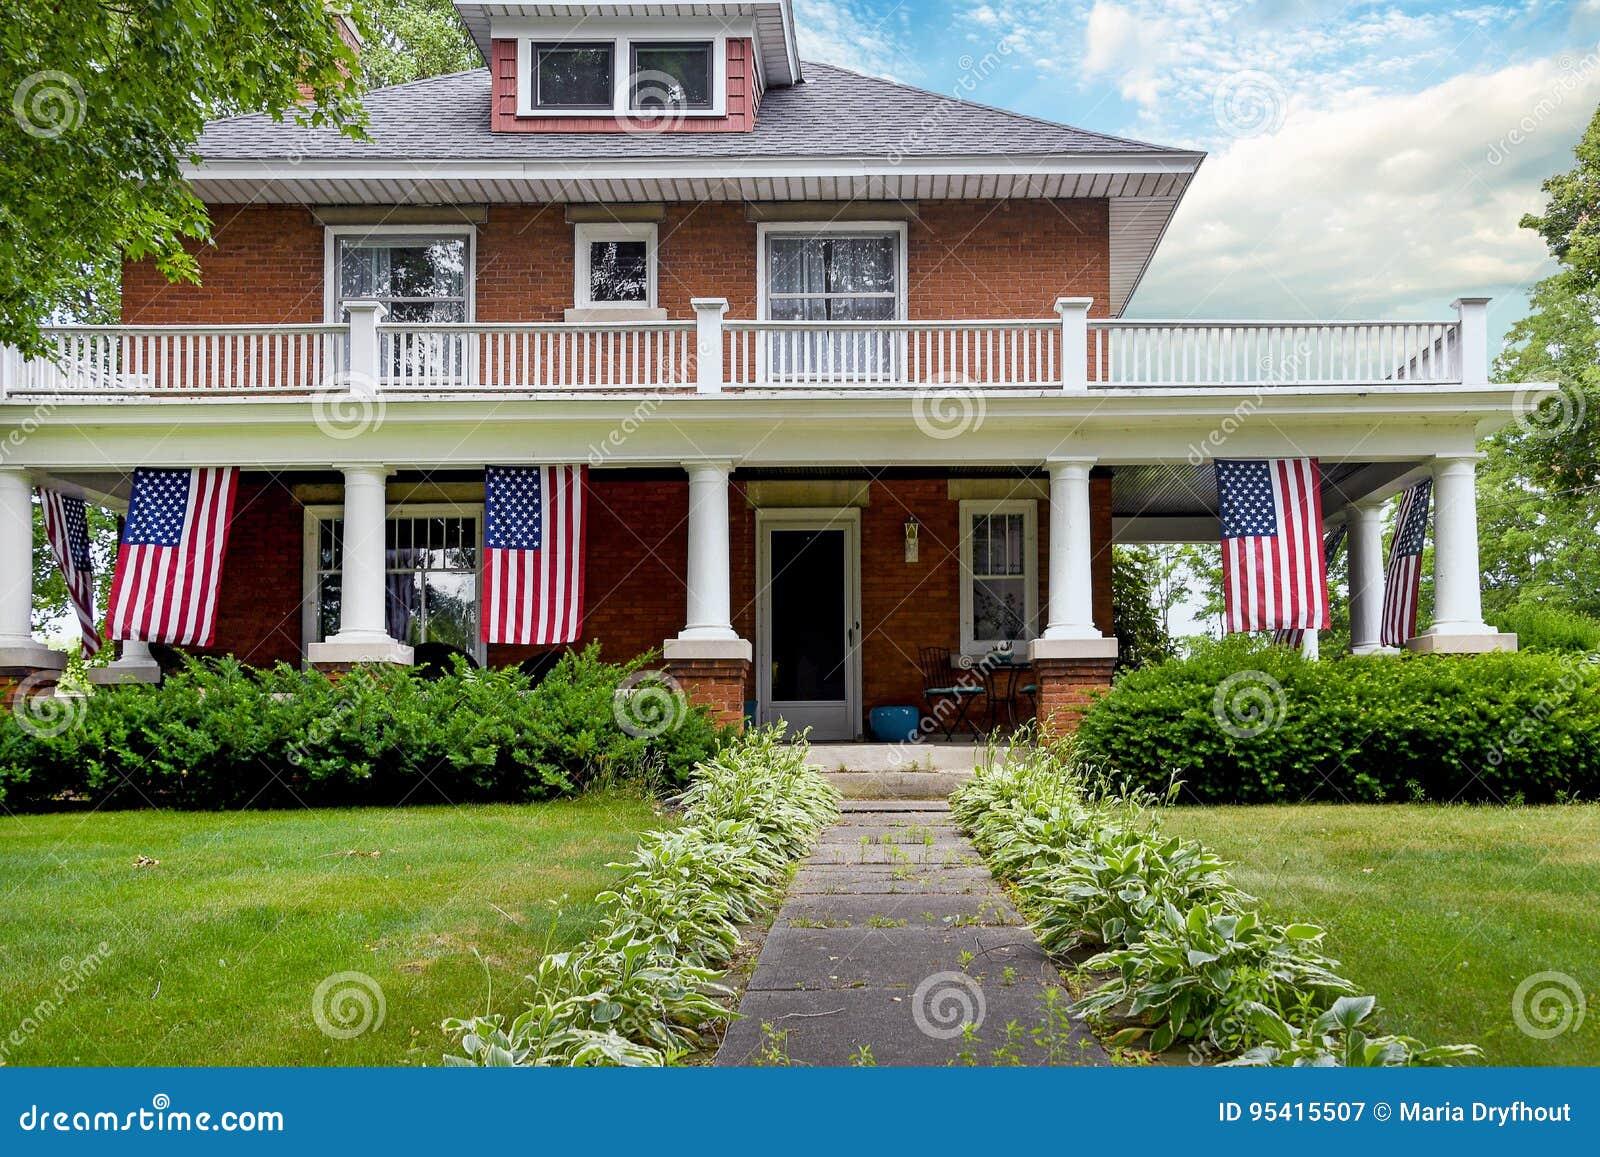 American Flags Decoration Old Brick Home Stock Image - Image of ...